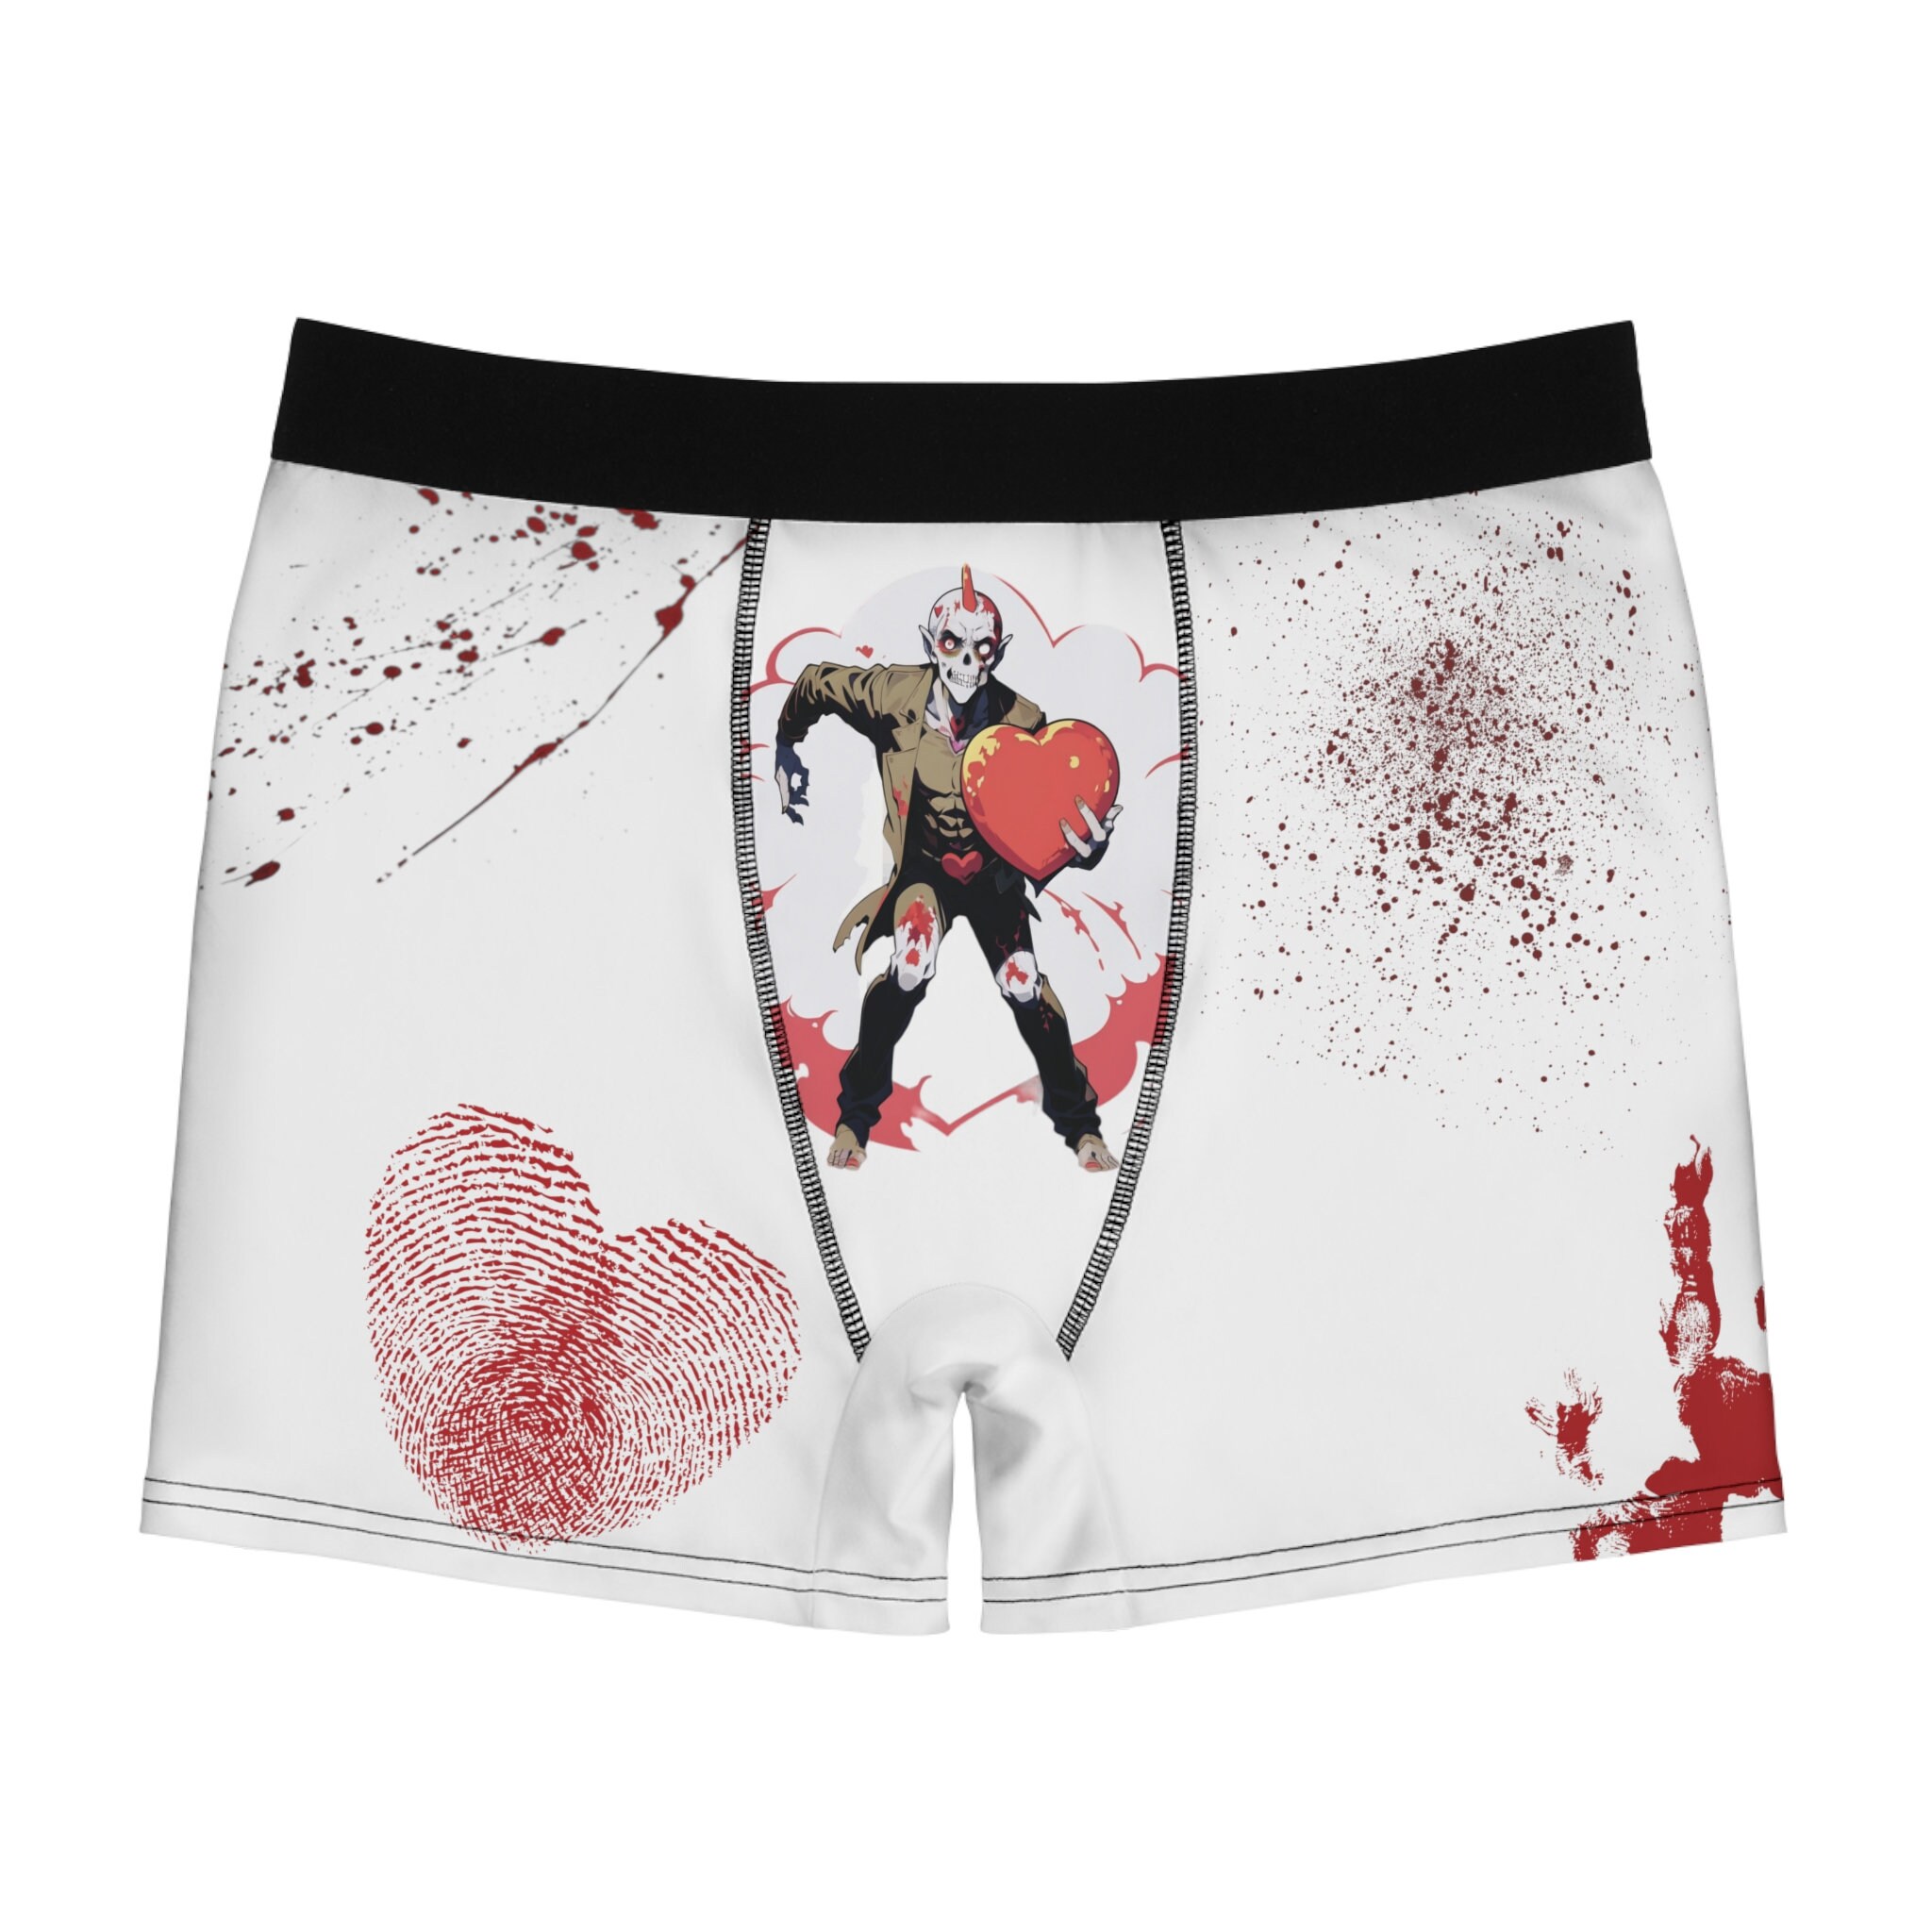 Got Your Period Boxer Briefs to Use During Menstruation